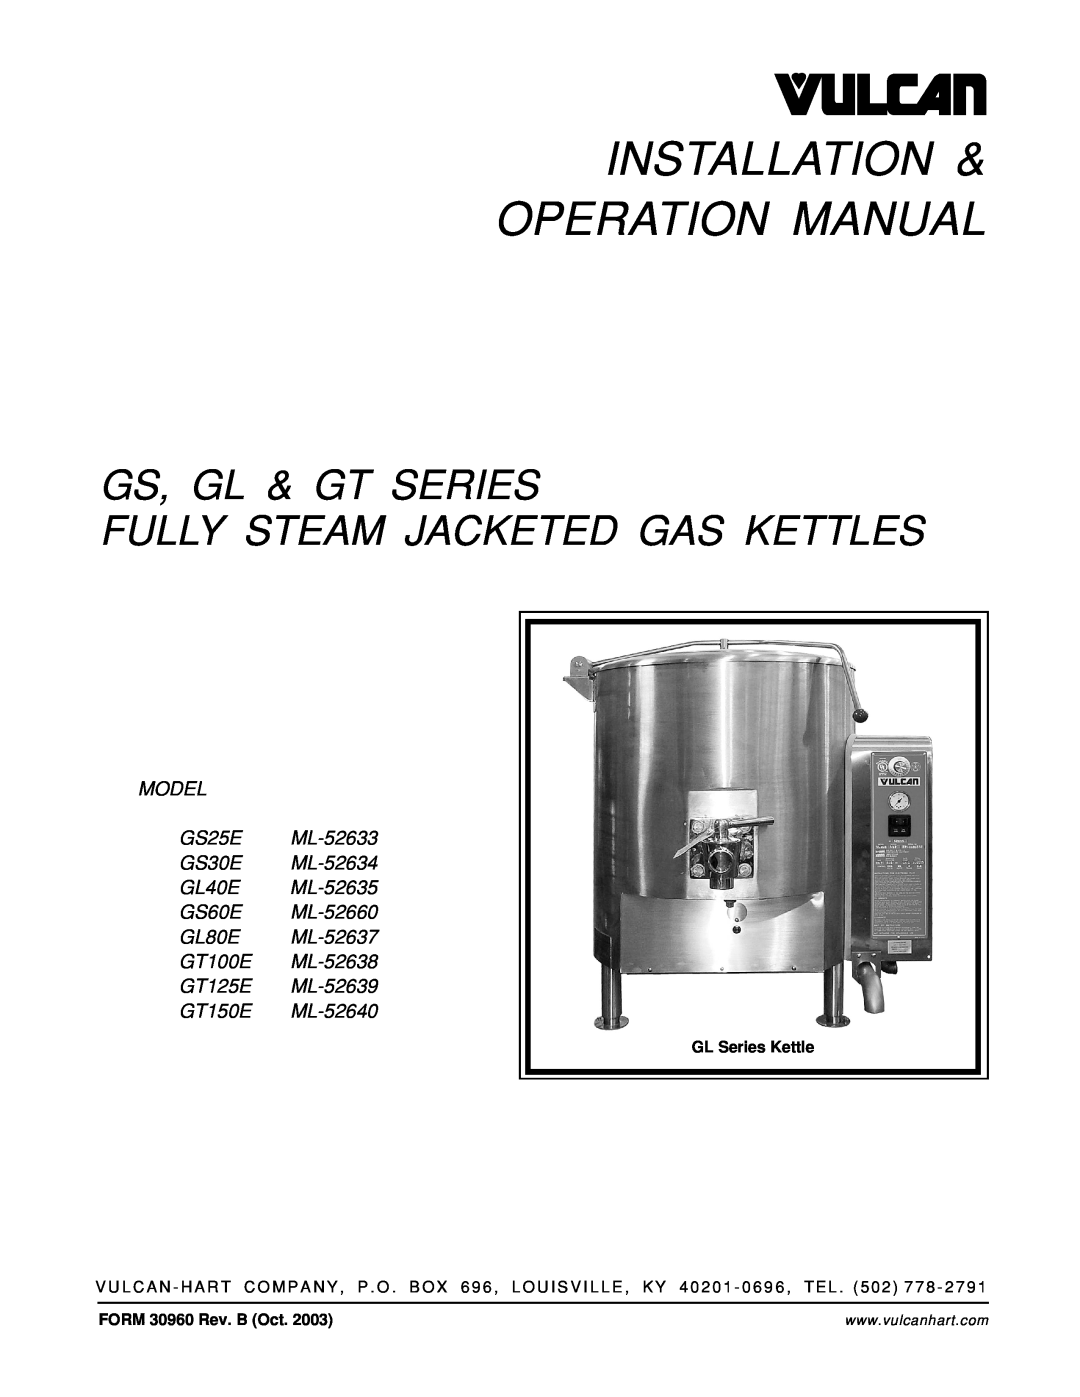 Vulcan-Hart ML-52635 operation manual Installation Operation Manual, Gs, Gl & Gt Series Fully Steam Jacketed Gas Kettles 